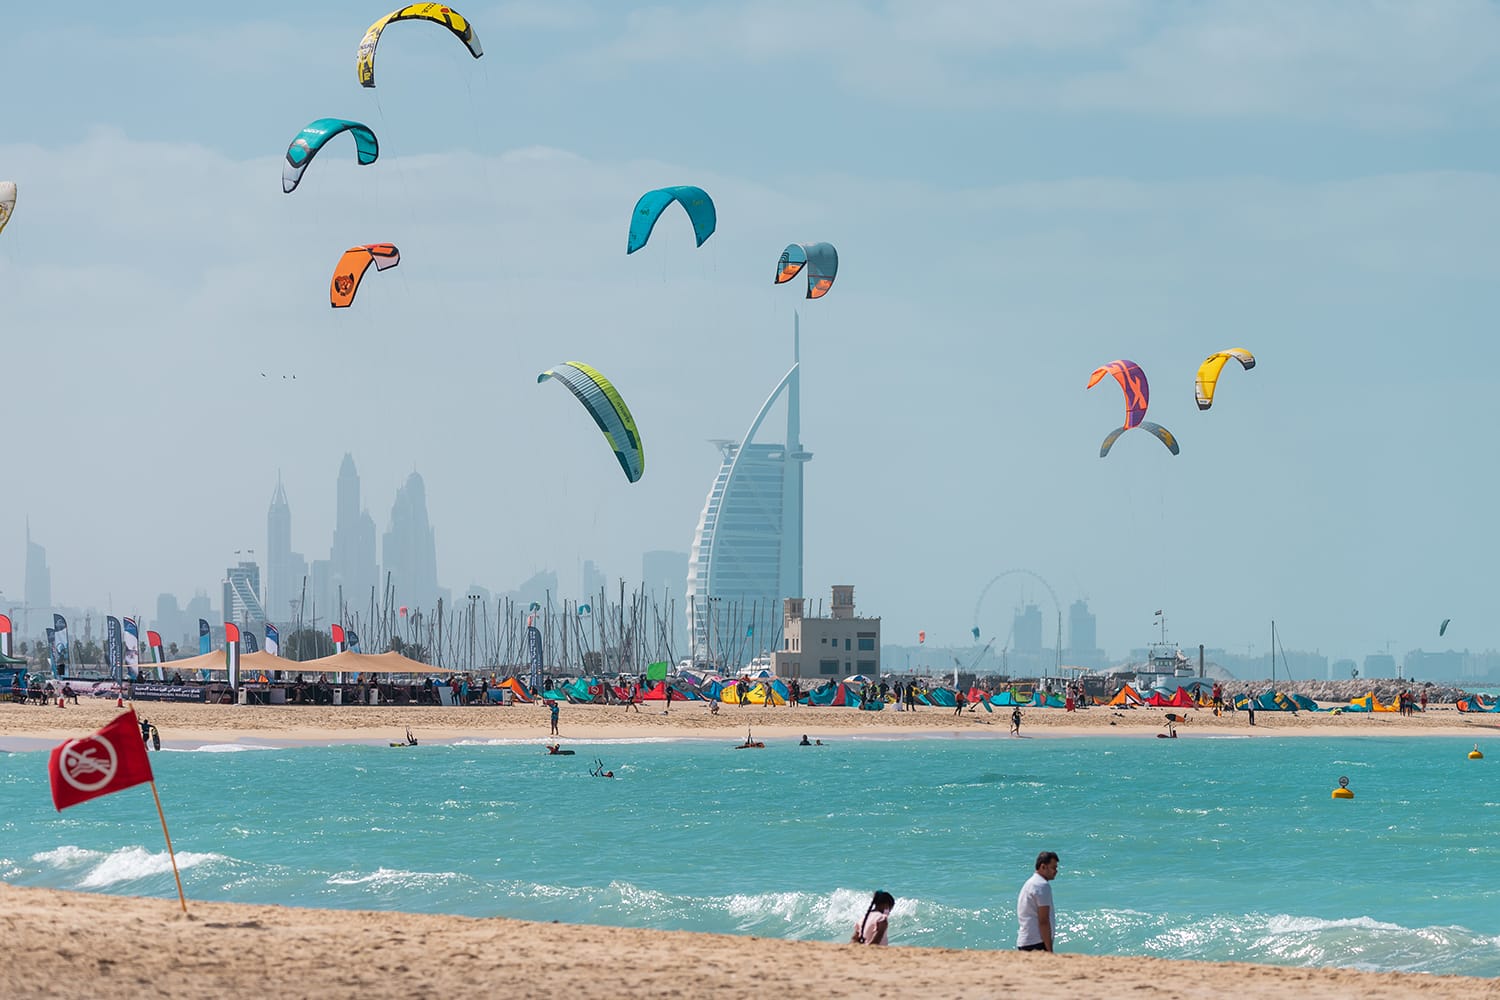 A view of colorful kite flying over Kite beach in Dubai